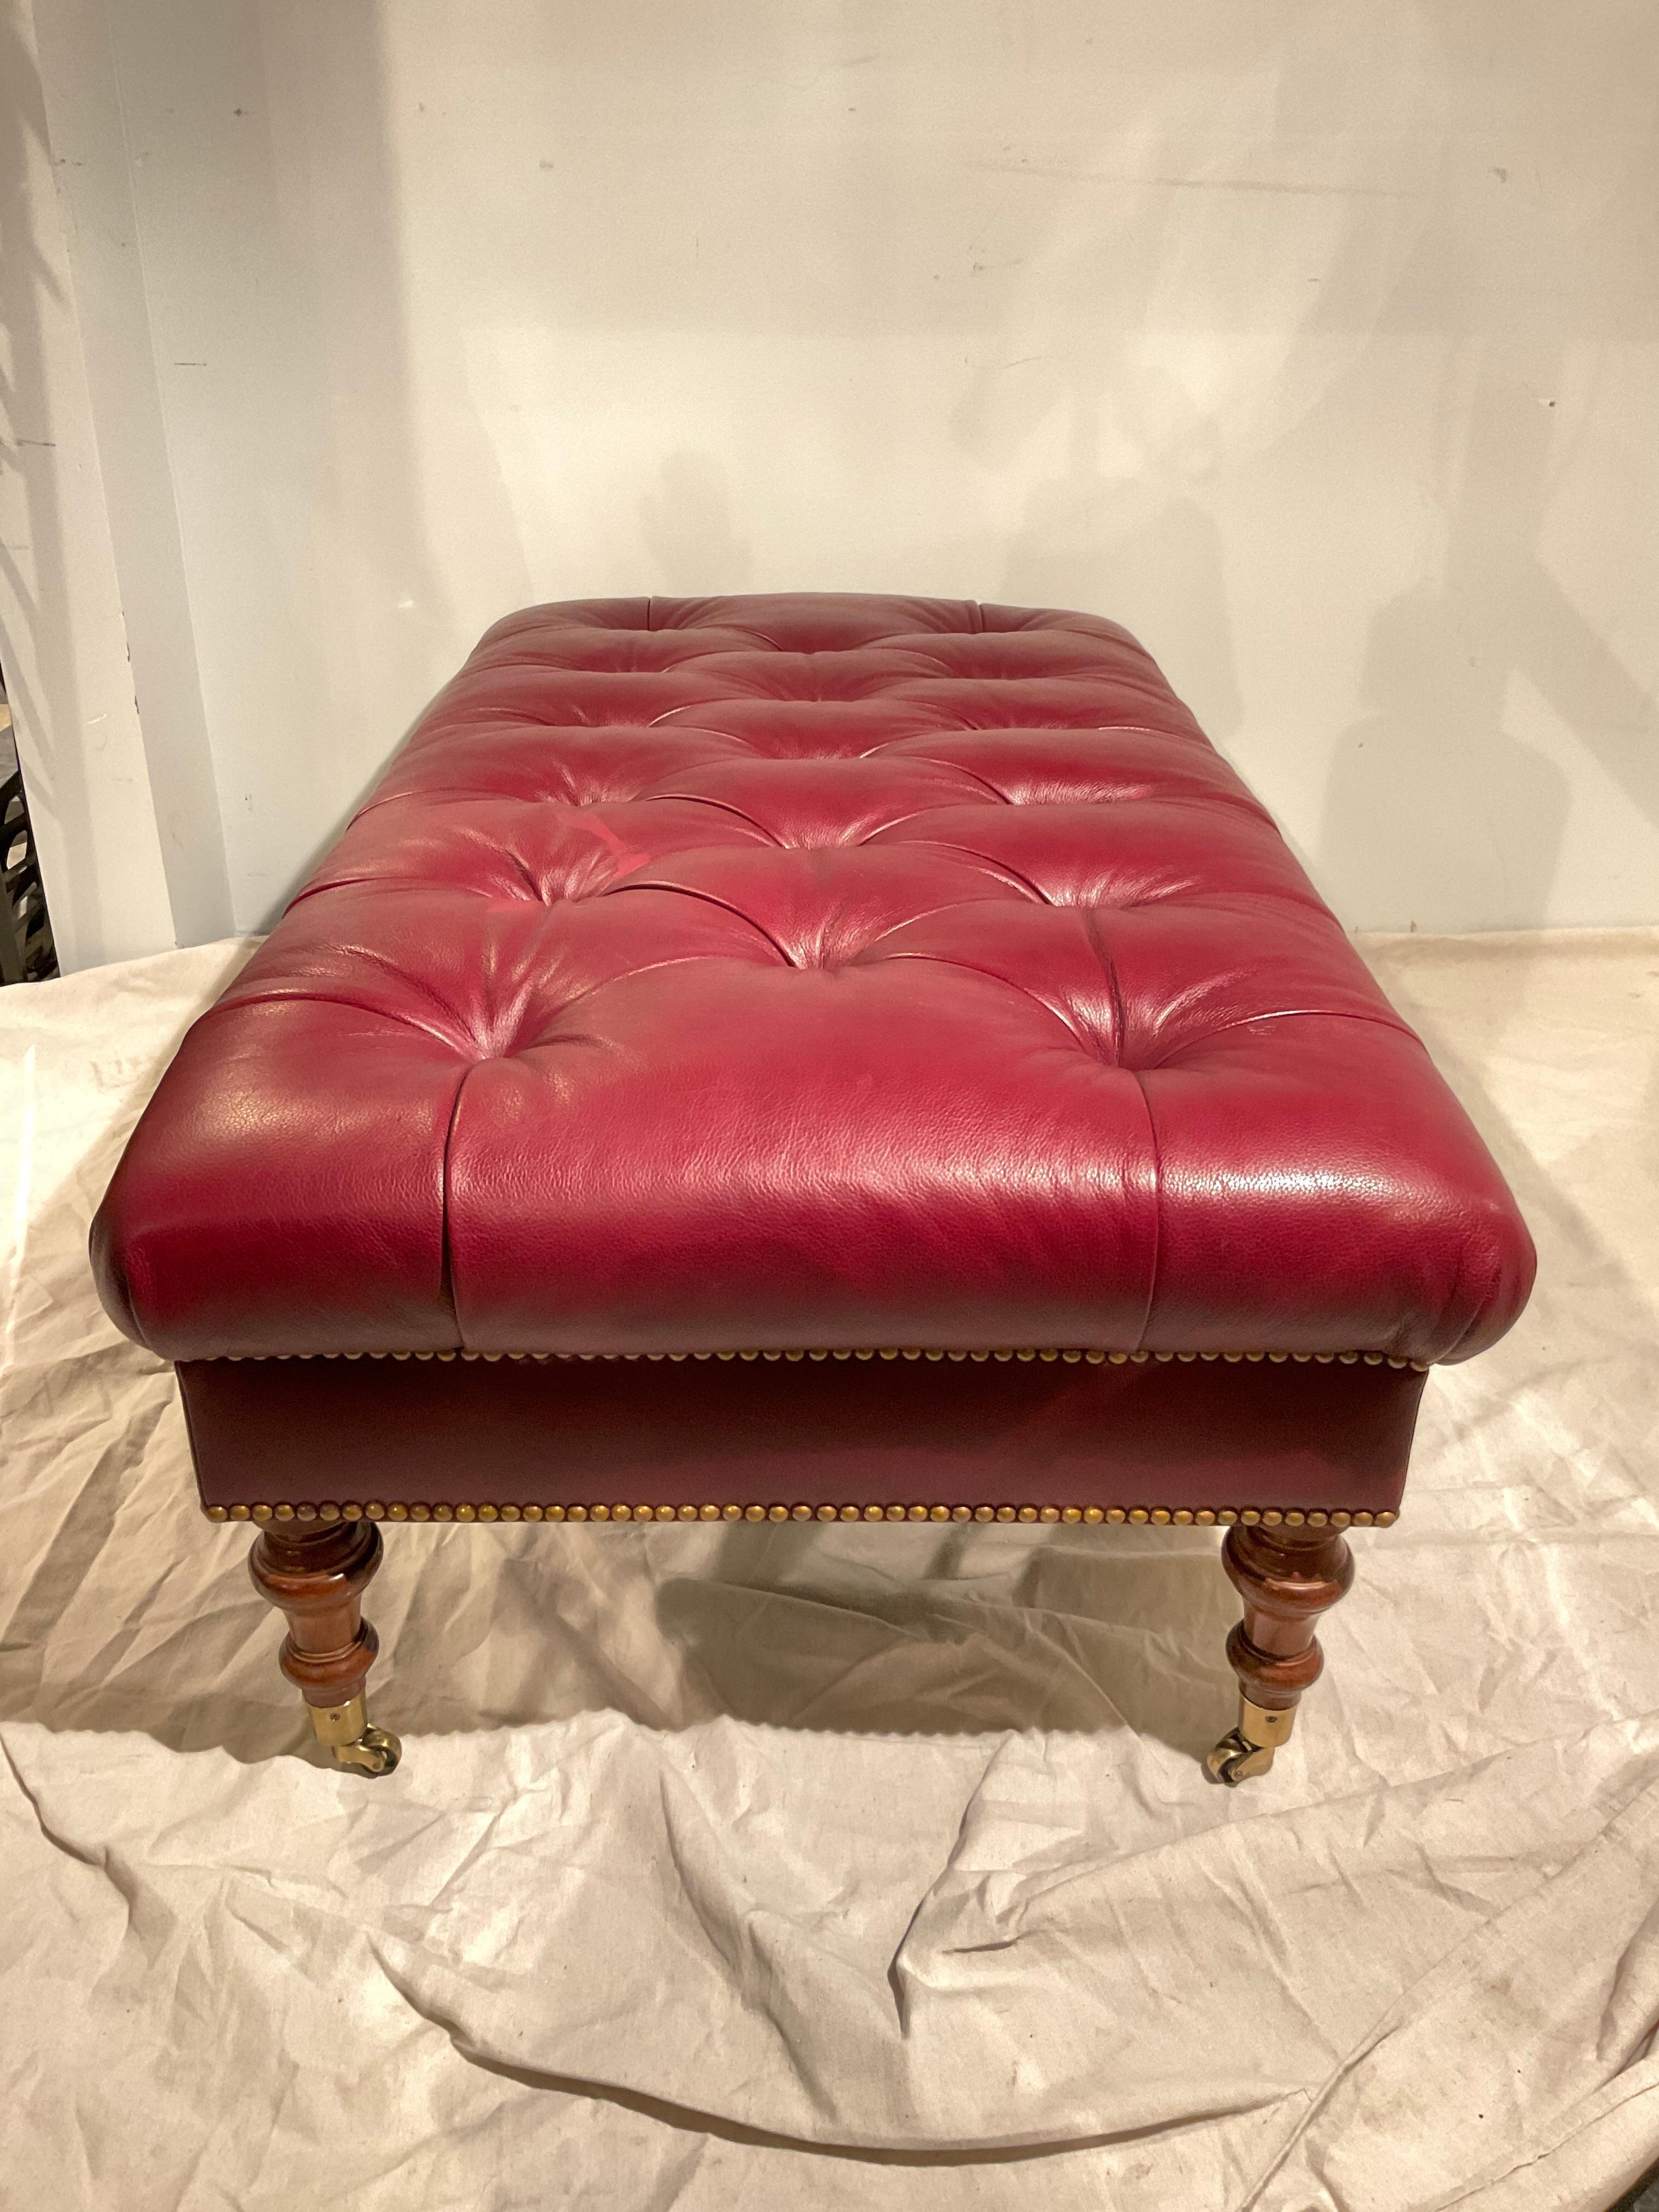 Contemporary Edward Ferrell Tufted Red Leather Ottoman On Brass Casters For Sale